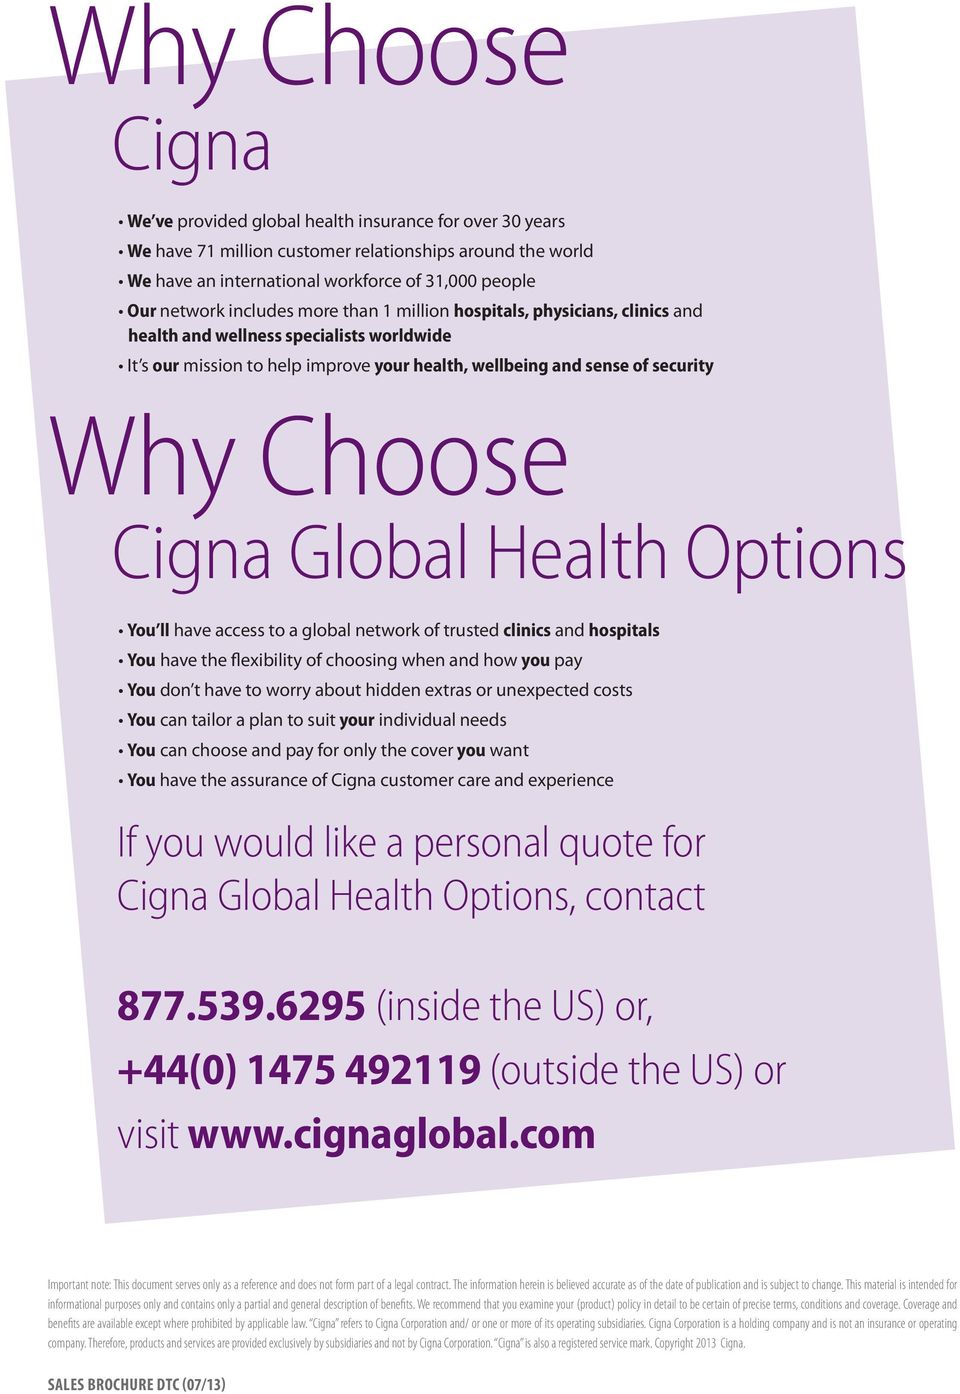 Cigna Global Health Options You ll have access to a global network of trusted clinics and hospitals You have the flexibility of choosing when and how you pay You don t have to worry about hidden